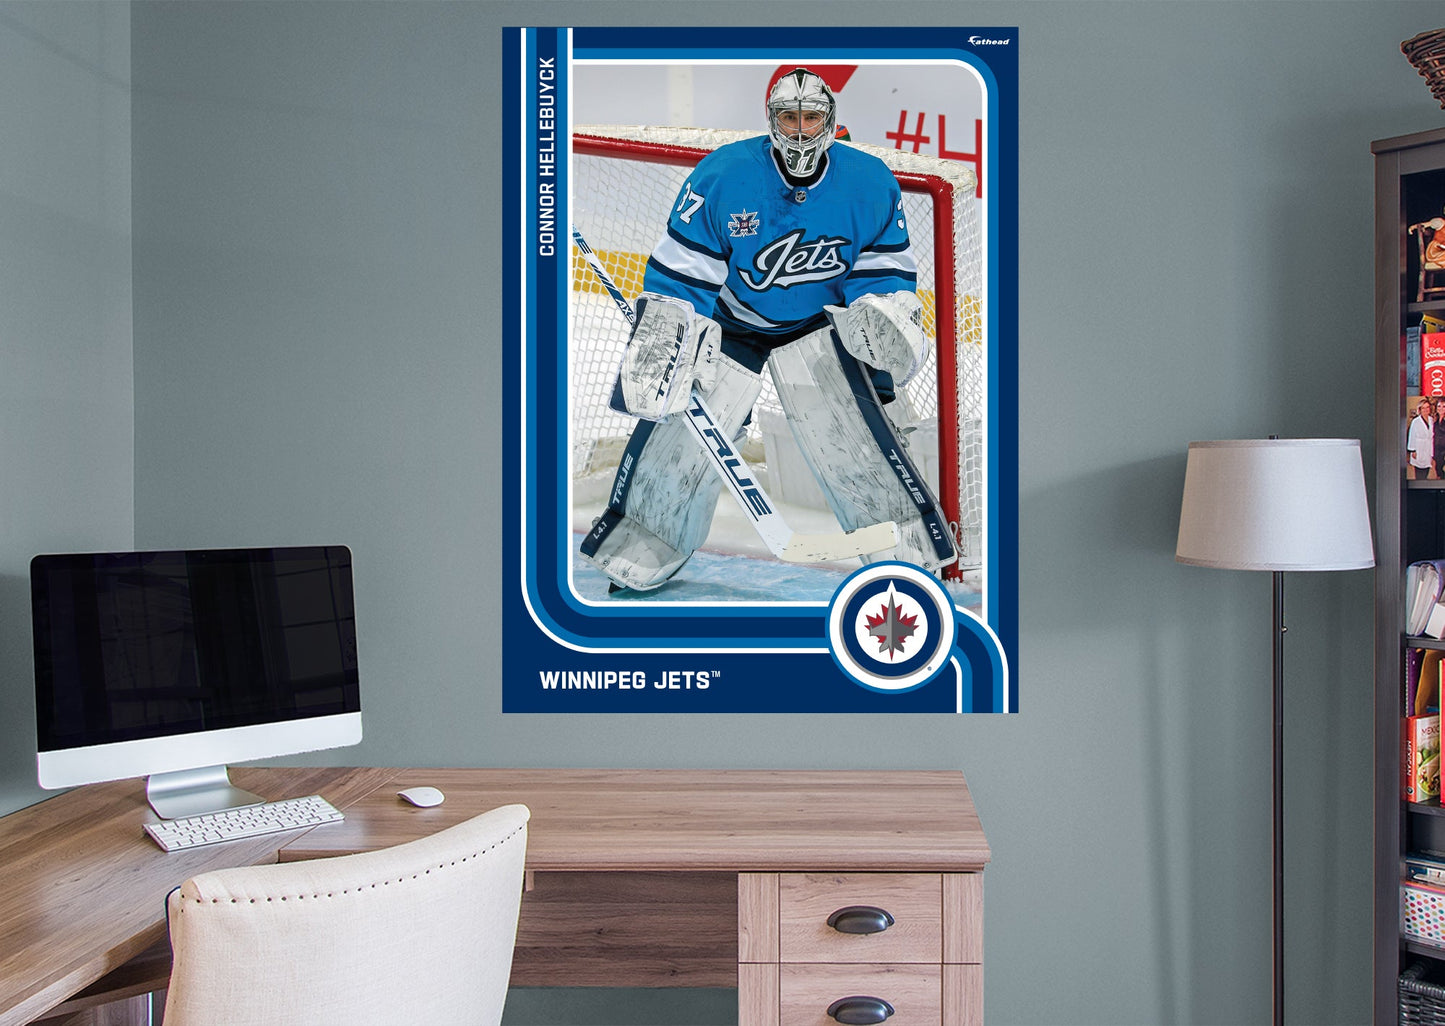 Winnipeg Jets: Connor Hellebuyck Poster - Officially Licensed NHL Removable Adhesive Decal